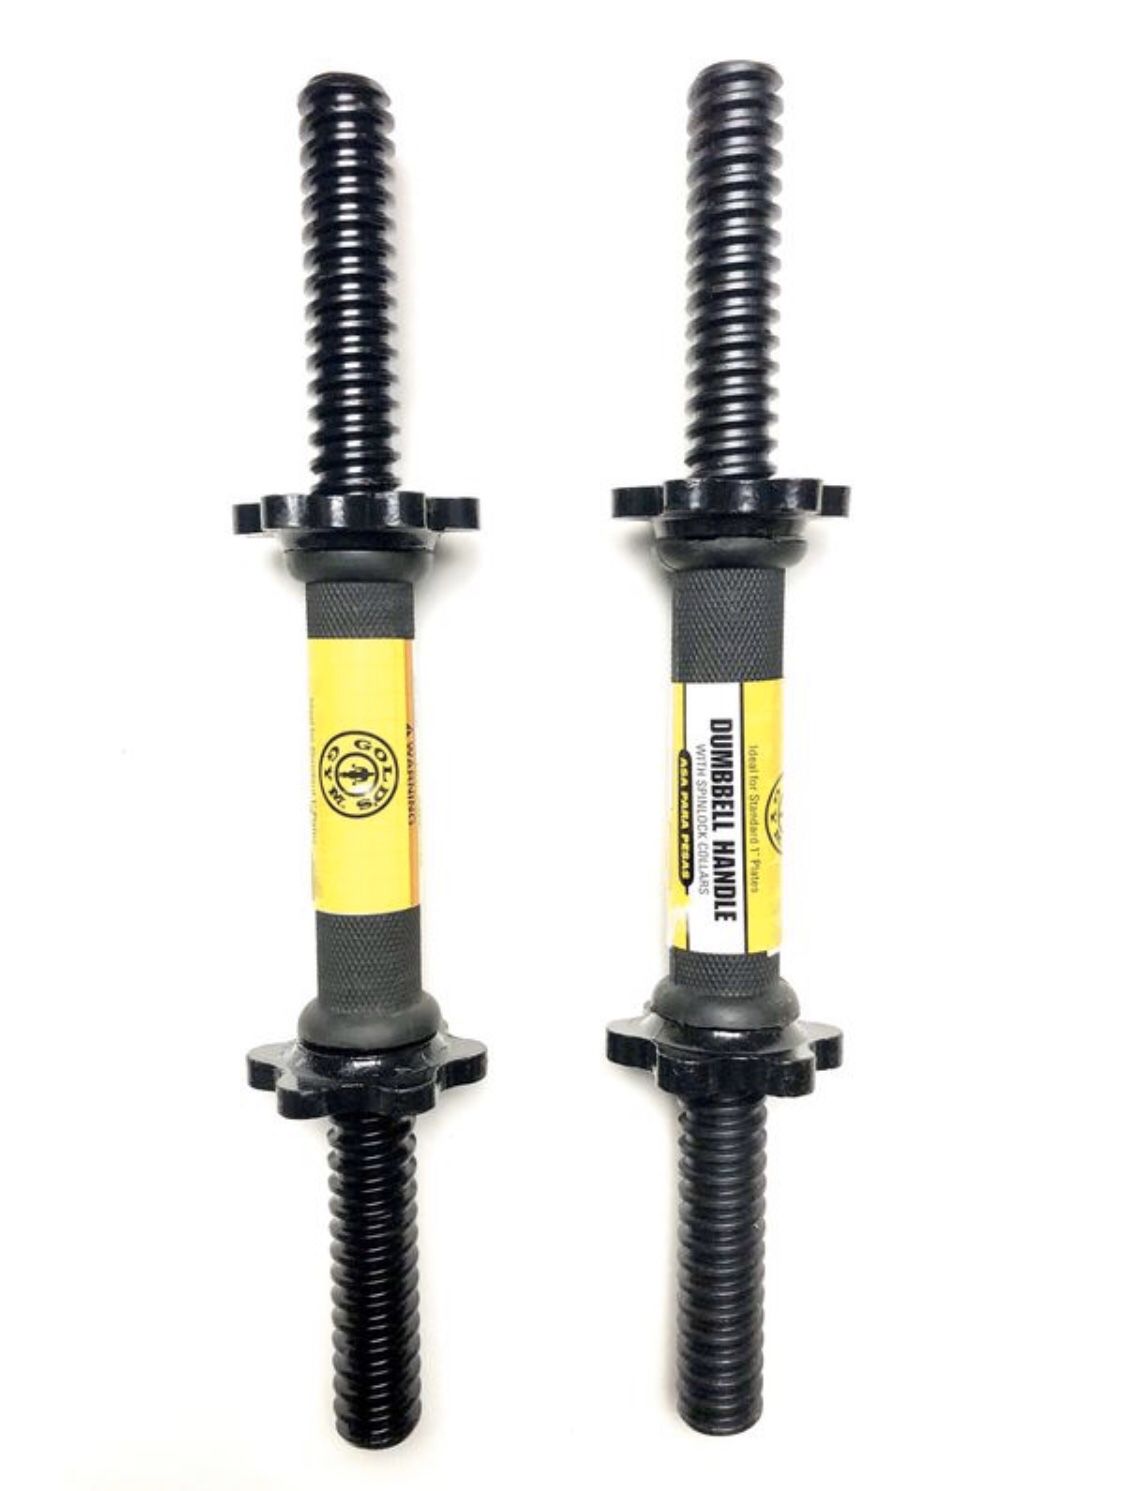 Golds Gym Dumbbell Handles W/ Spinlock Lot Of 2 